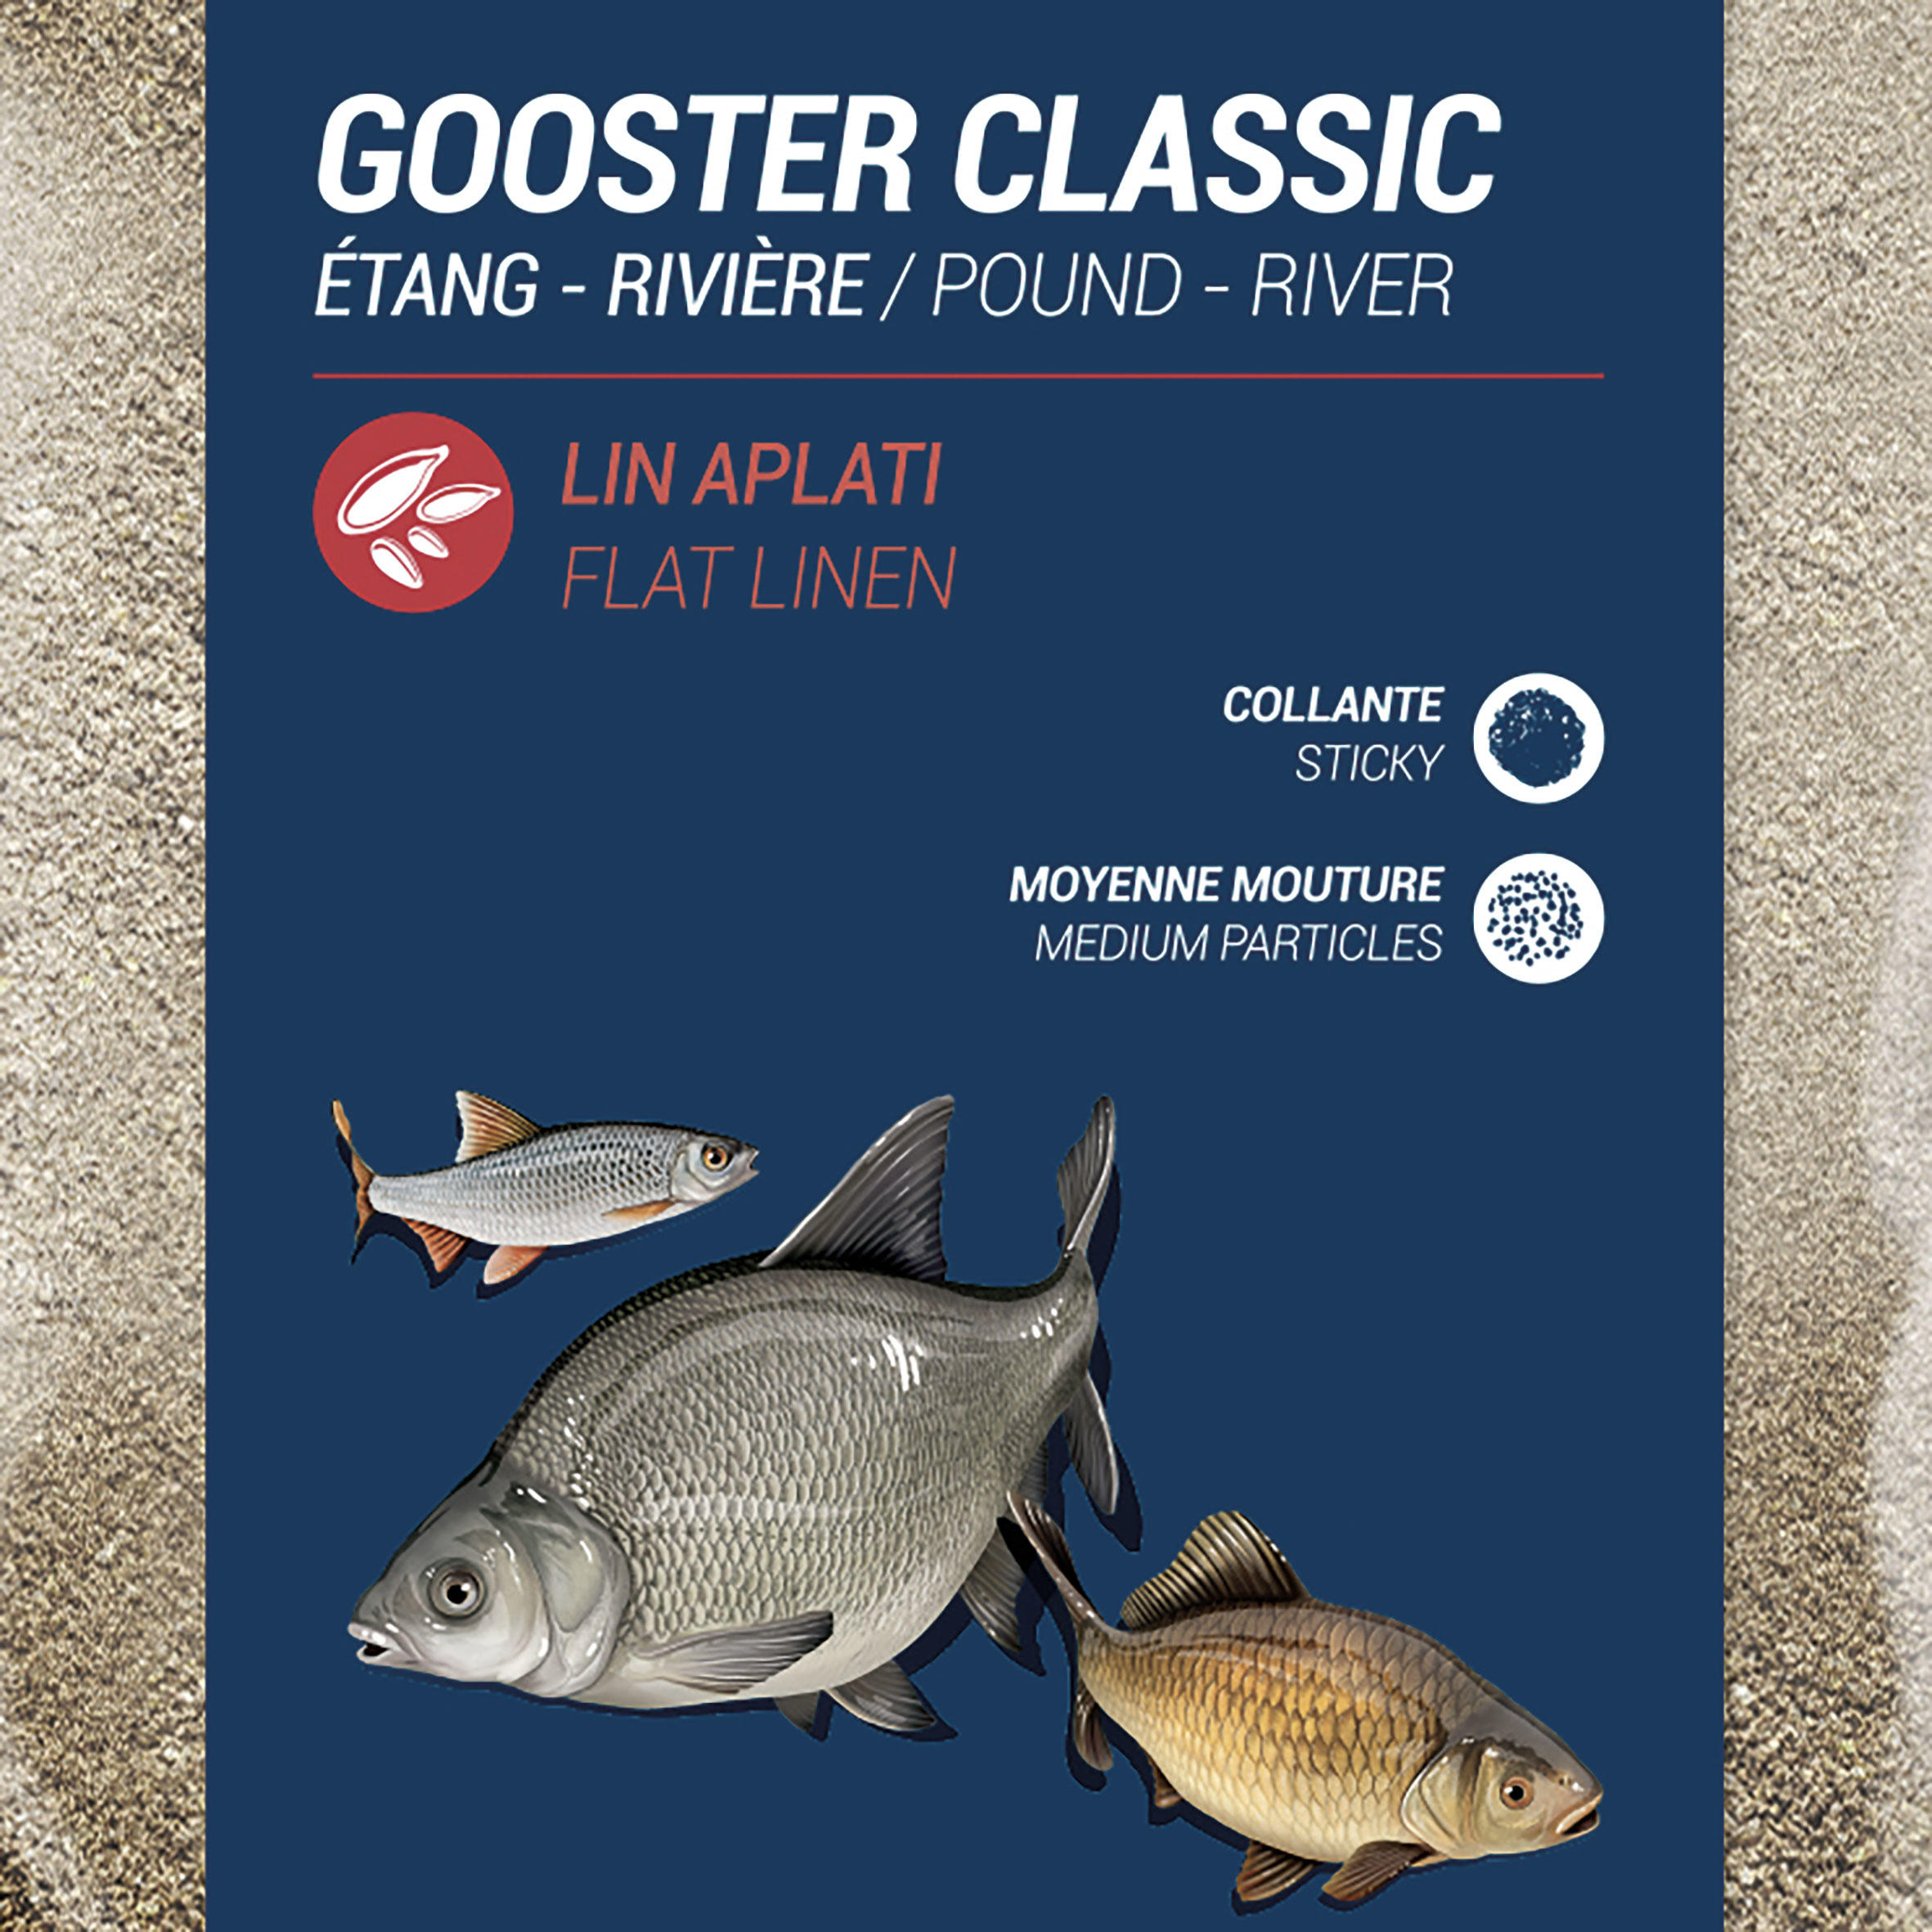 GOOSTER CLASSIC BAIT FOR ALL FISH ANISE 4X4 4.75kg 2/5